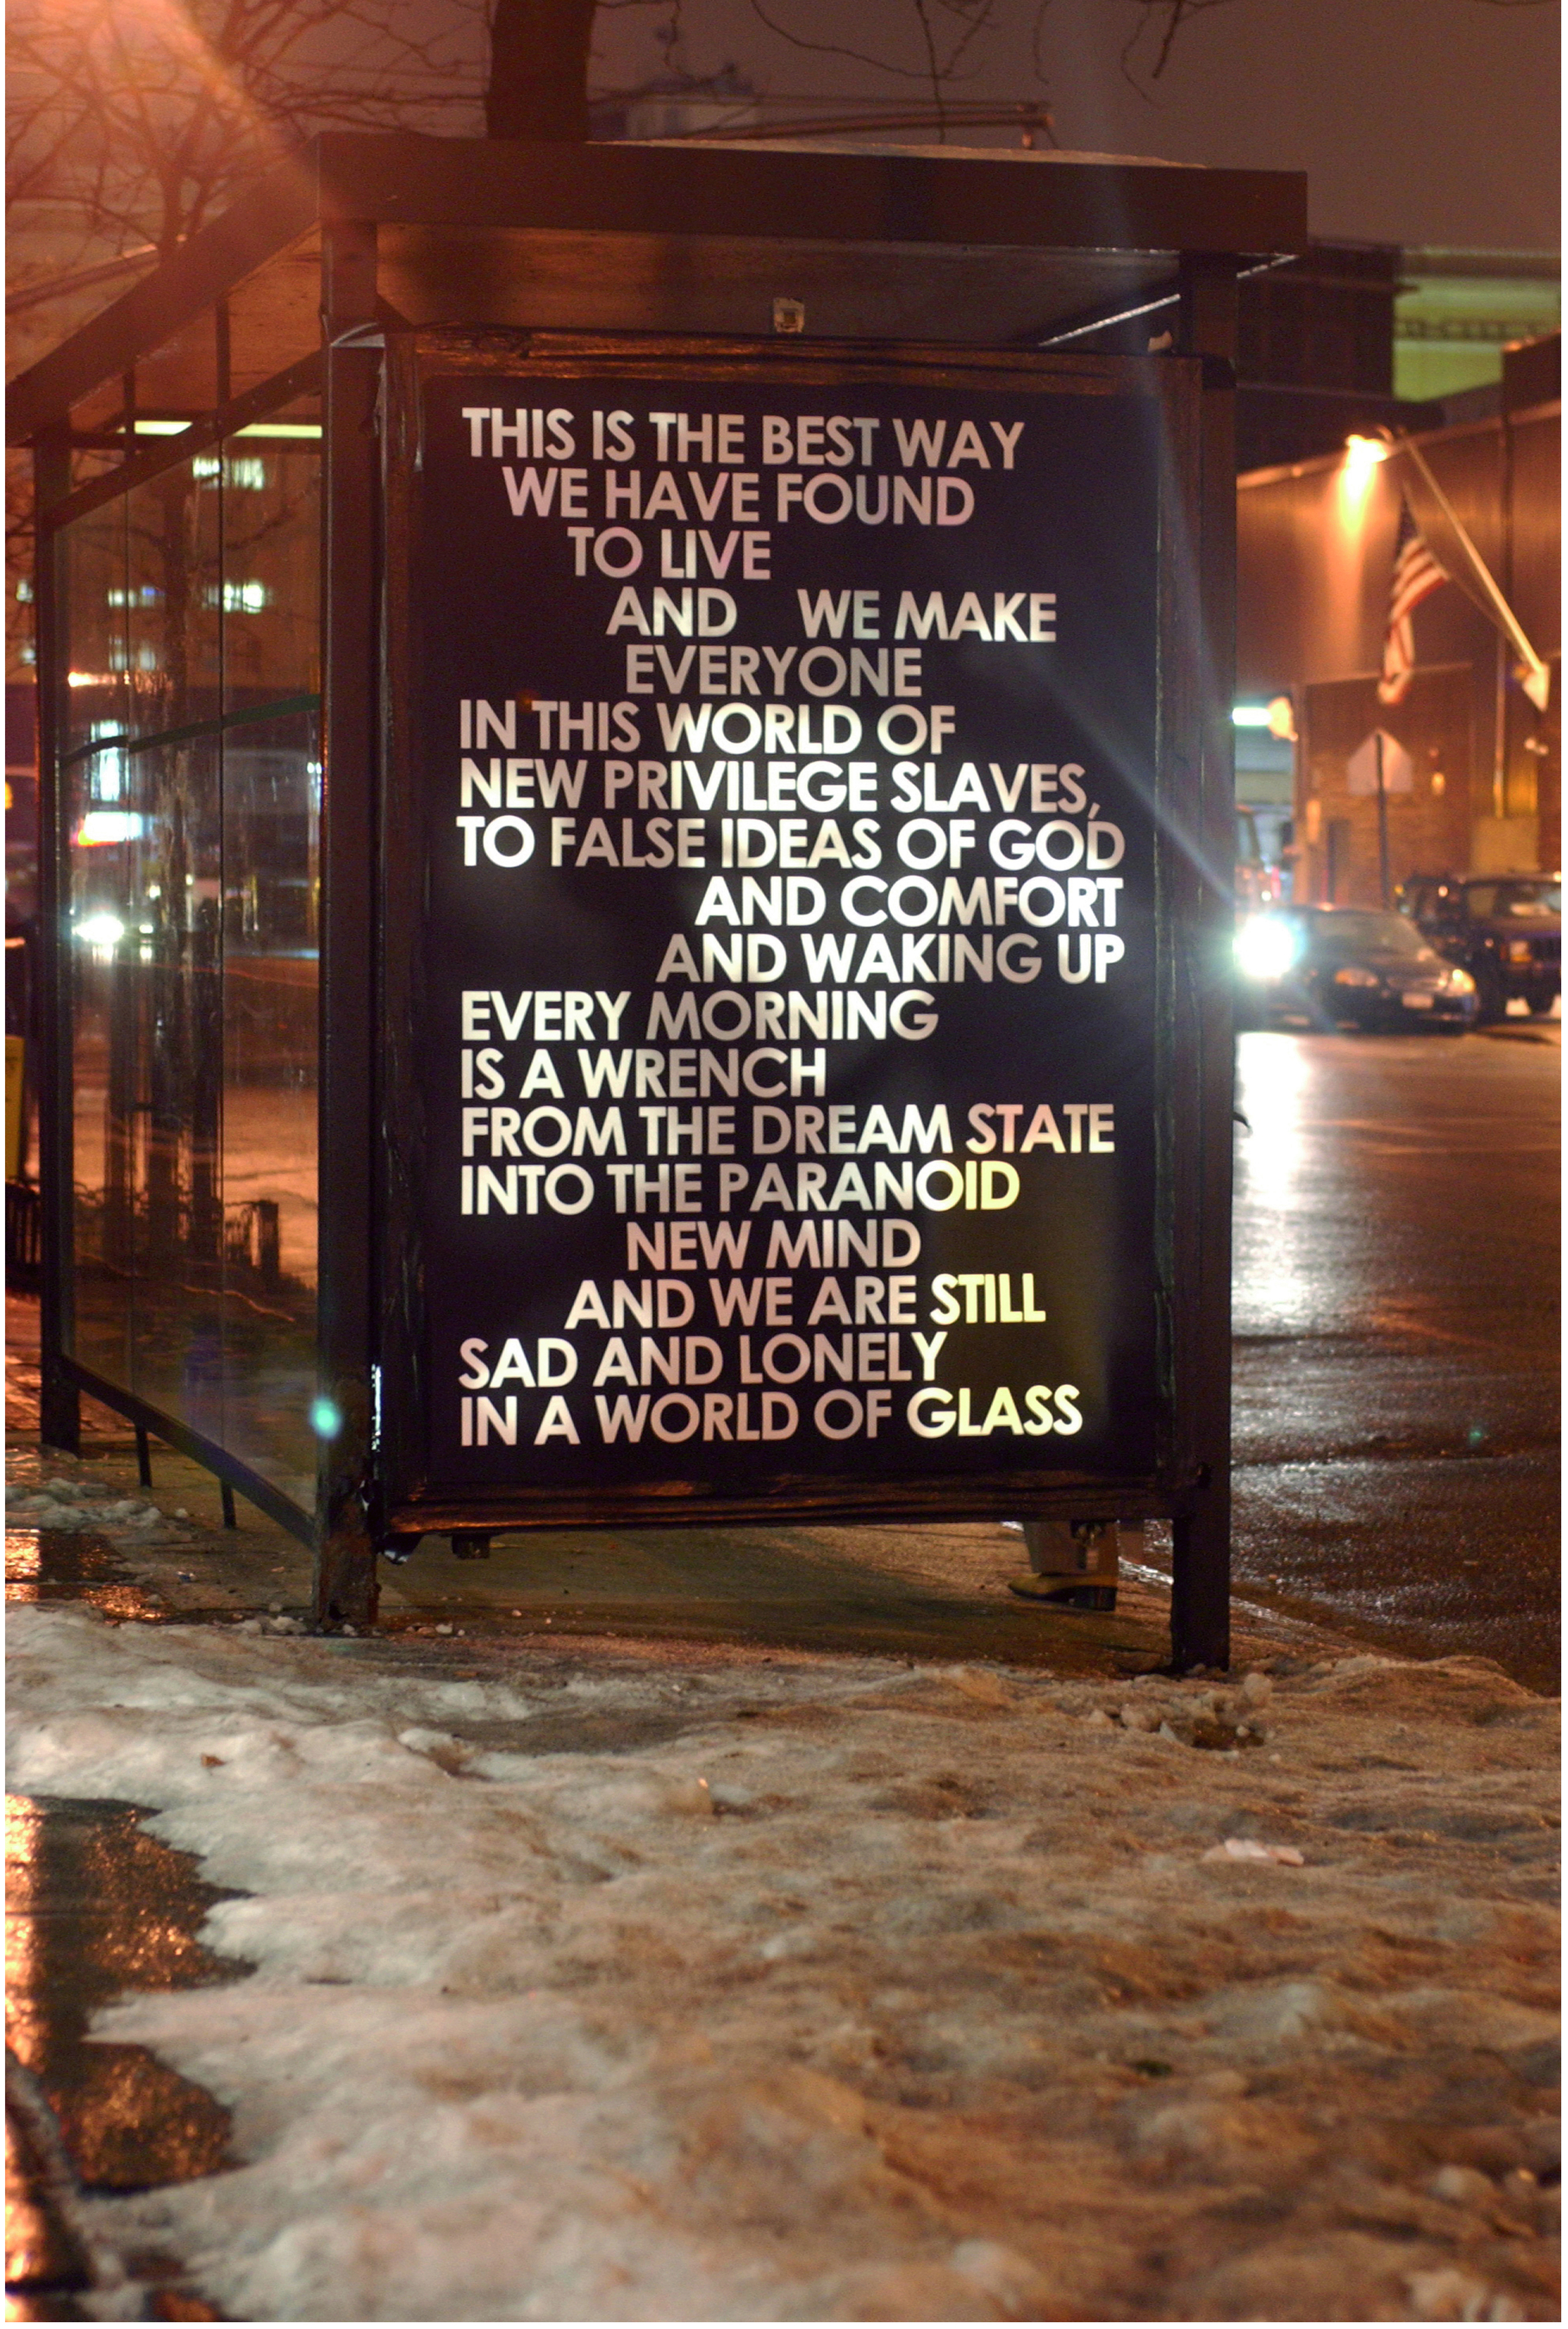 THIS IS THE BEST WAY, New York, 2006.jpg